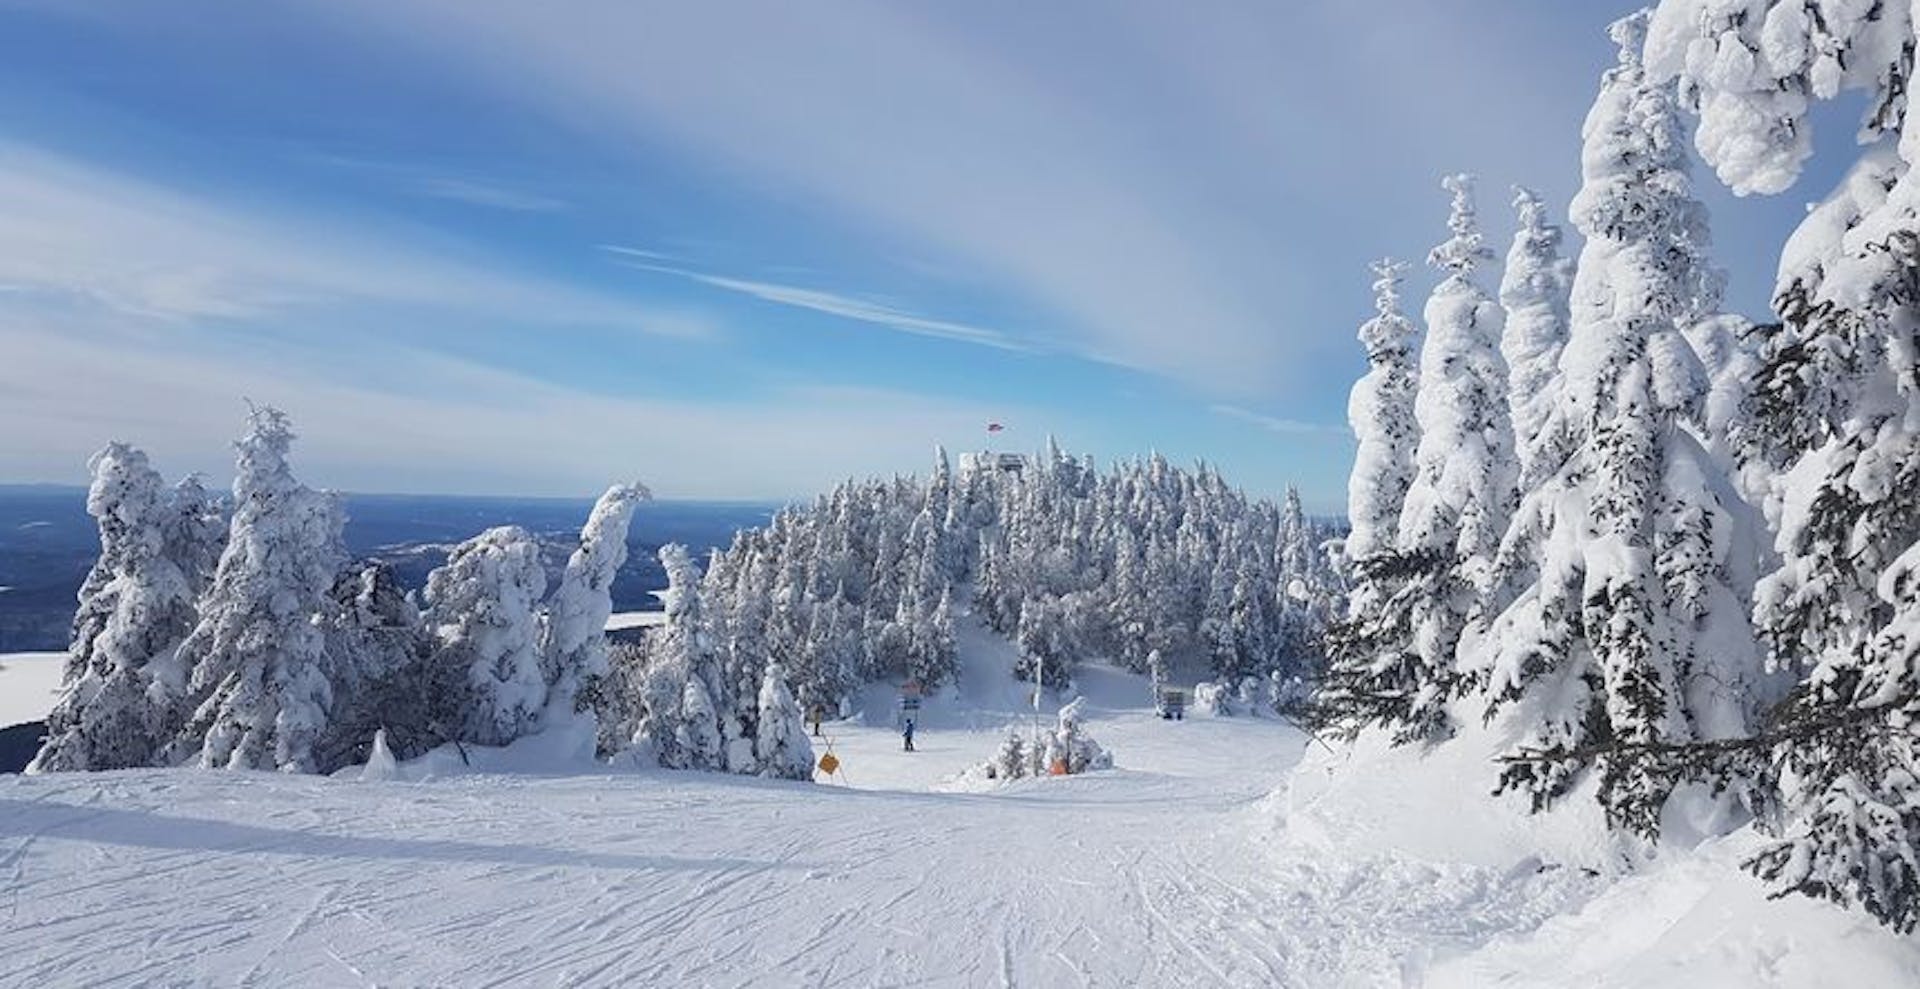 Mont Tremblant - the best ski resort on the East